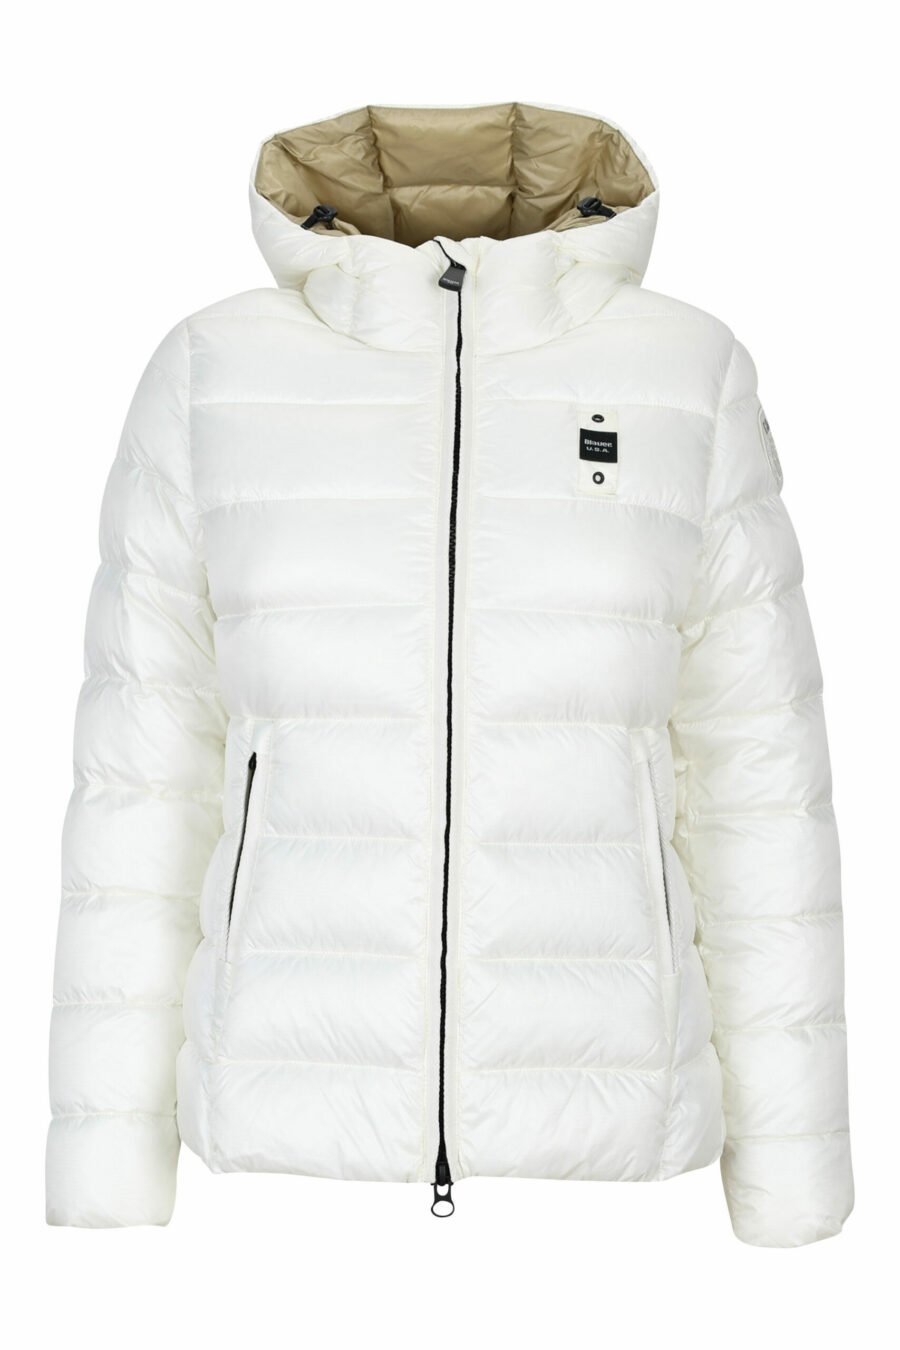 White straight lined hooded jacket with beige inside with logo patch - 8058610675653 scaled